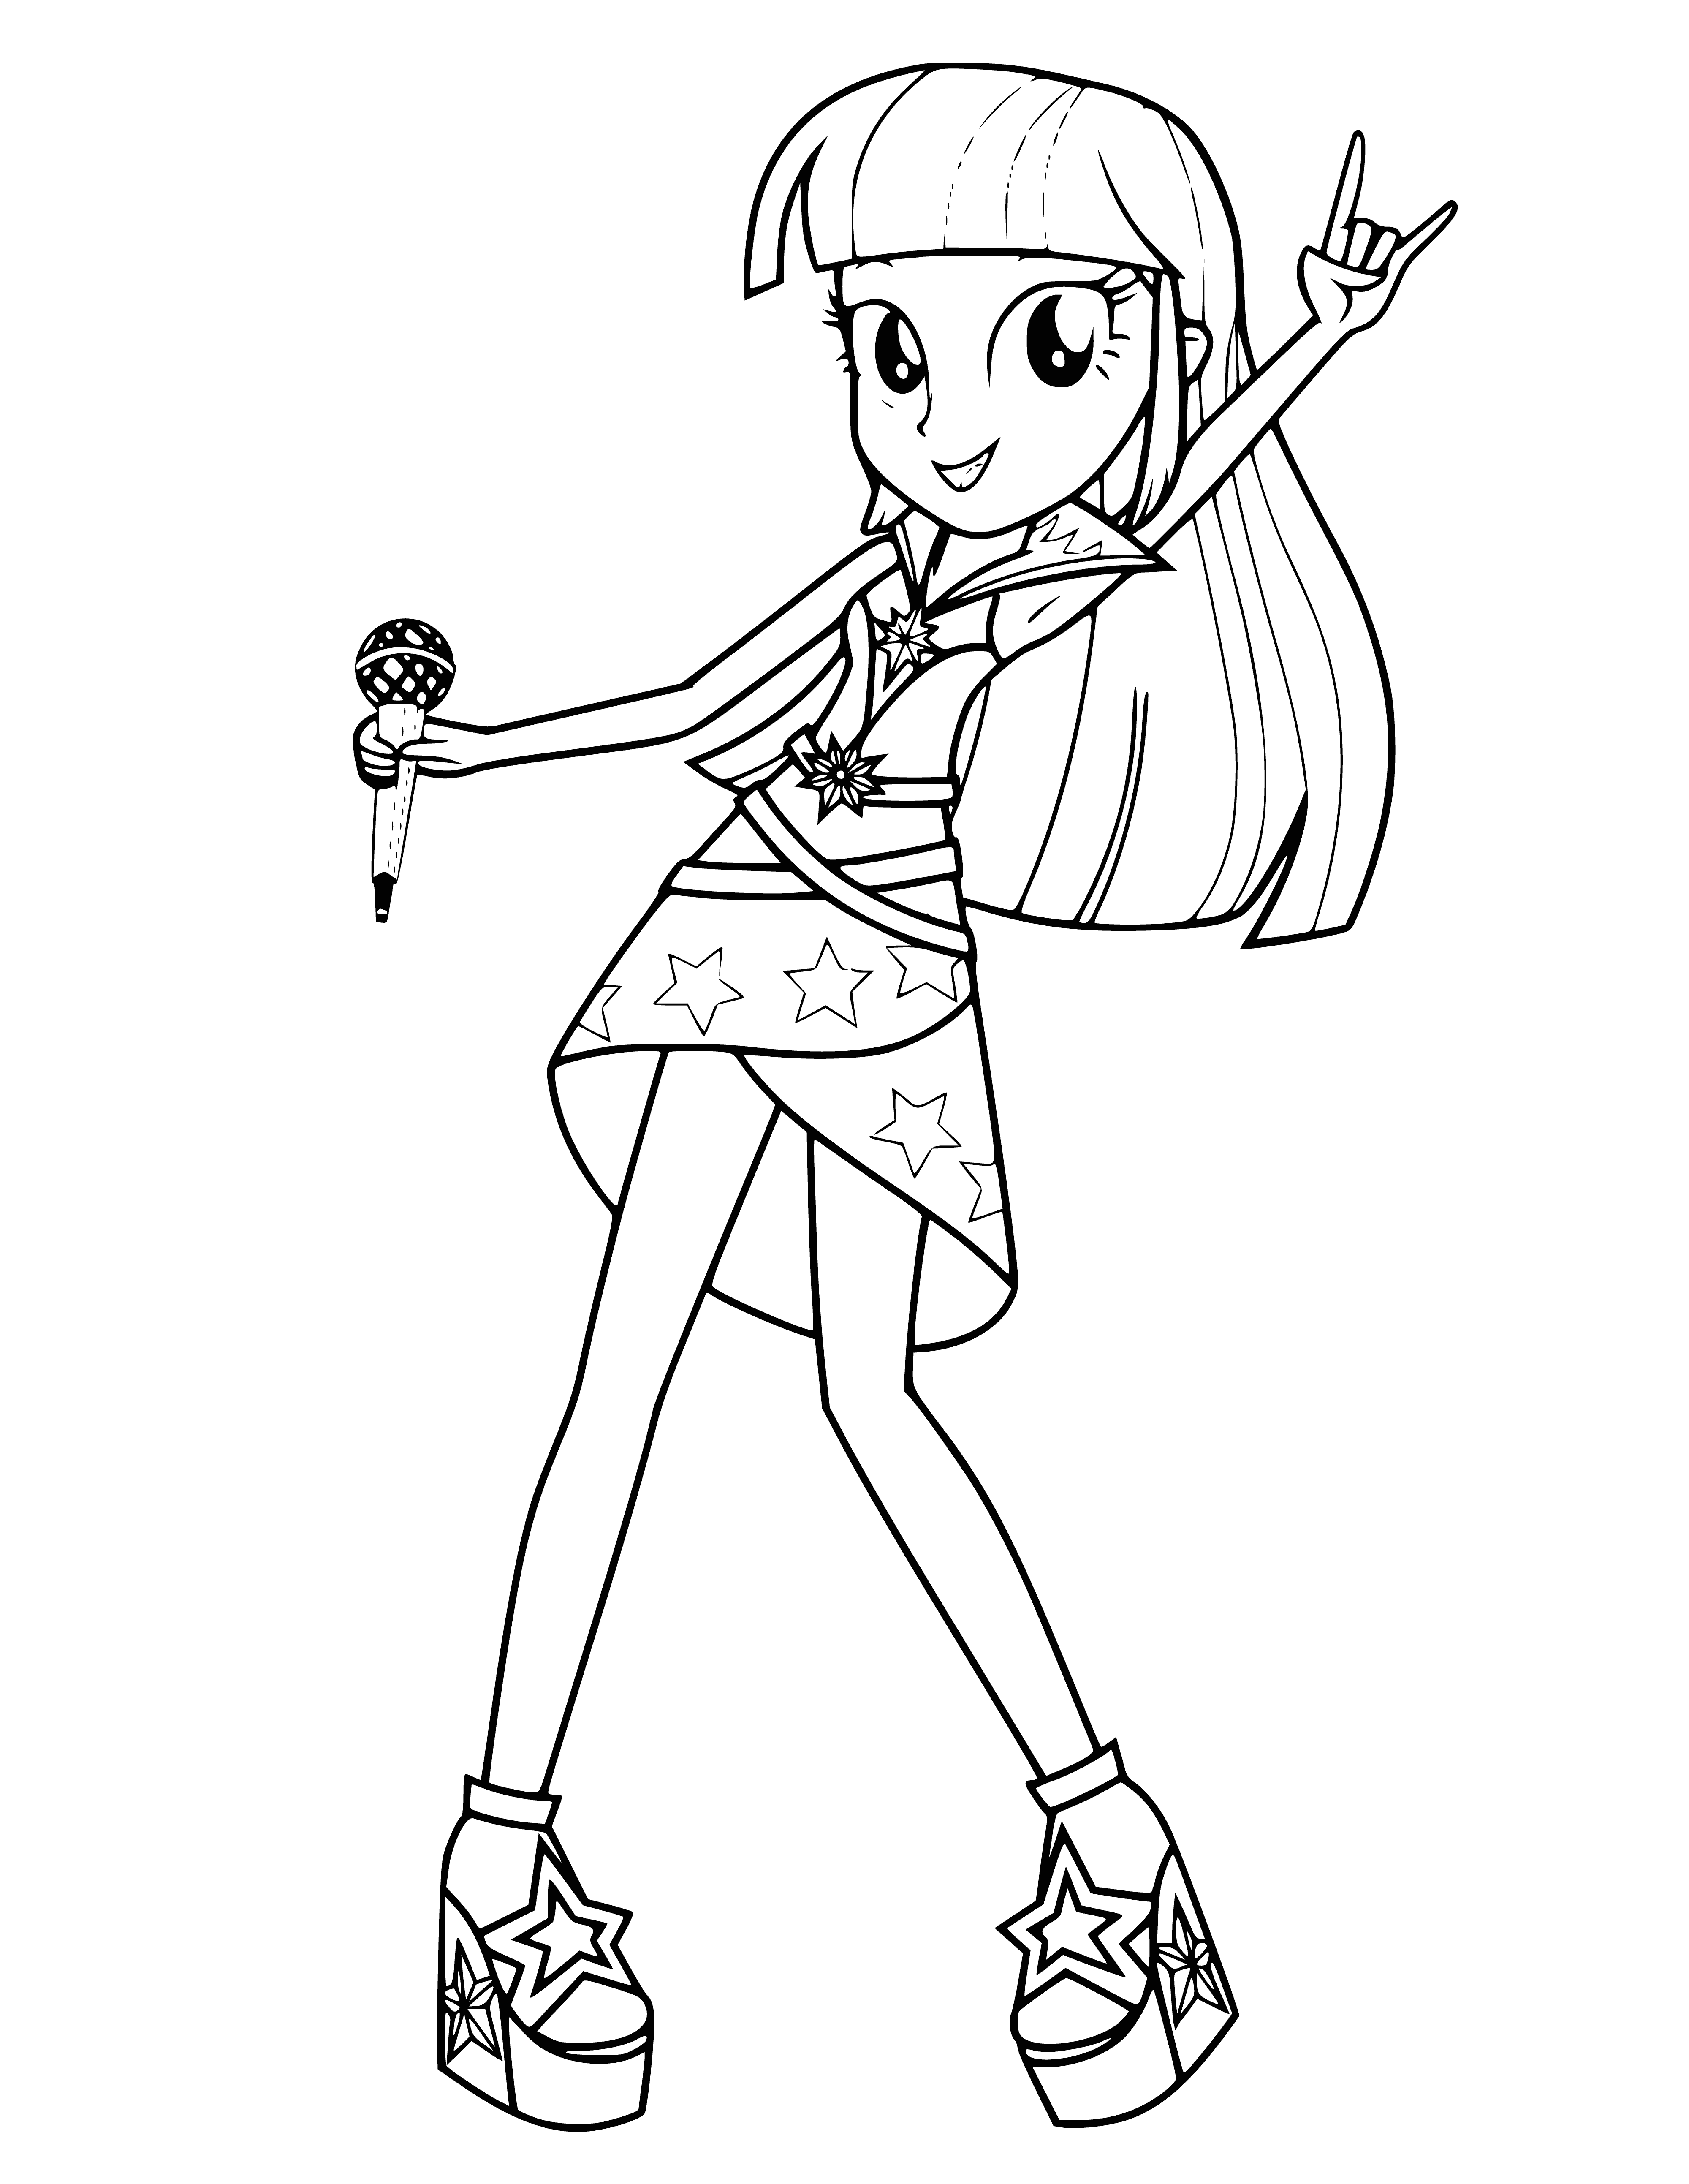 coloring page: Twilight Sparkle is a pink-haired human with blue eyes wearing a pink/purple outfit & holding a book.